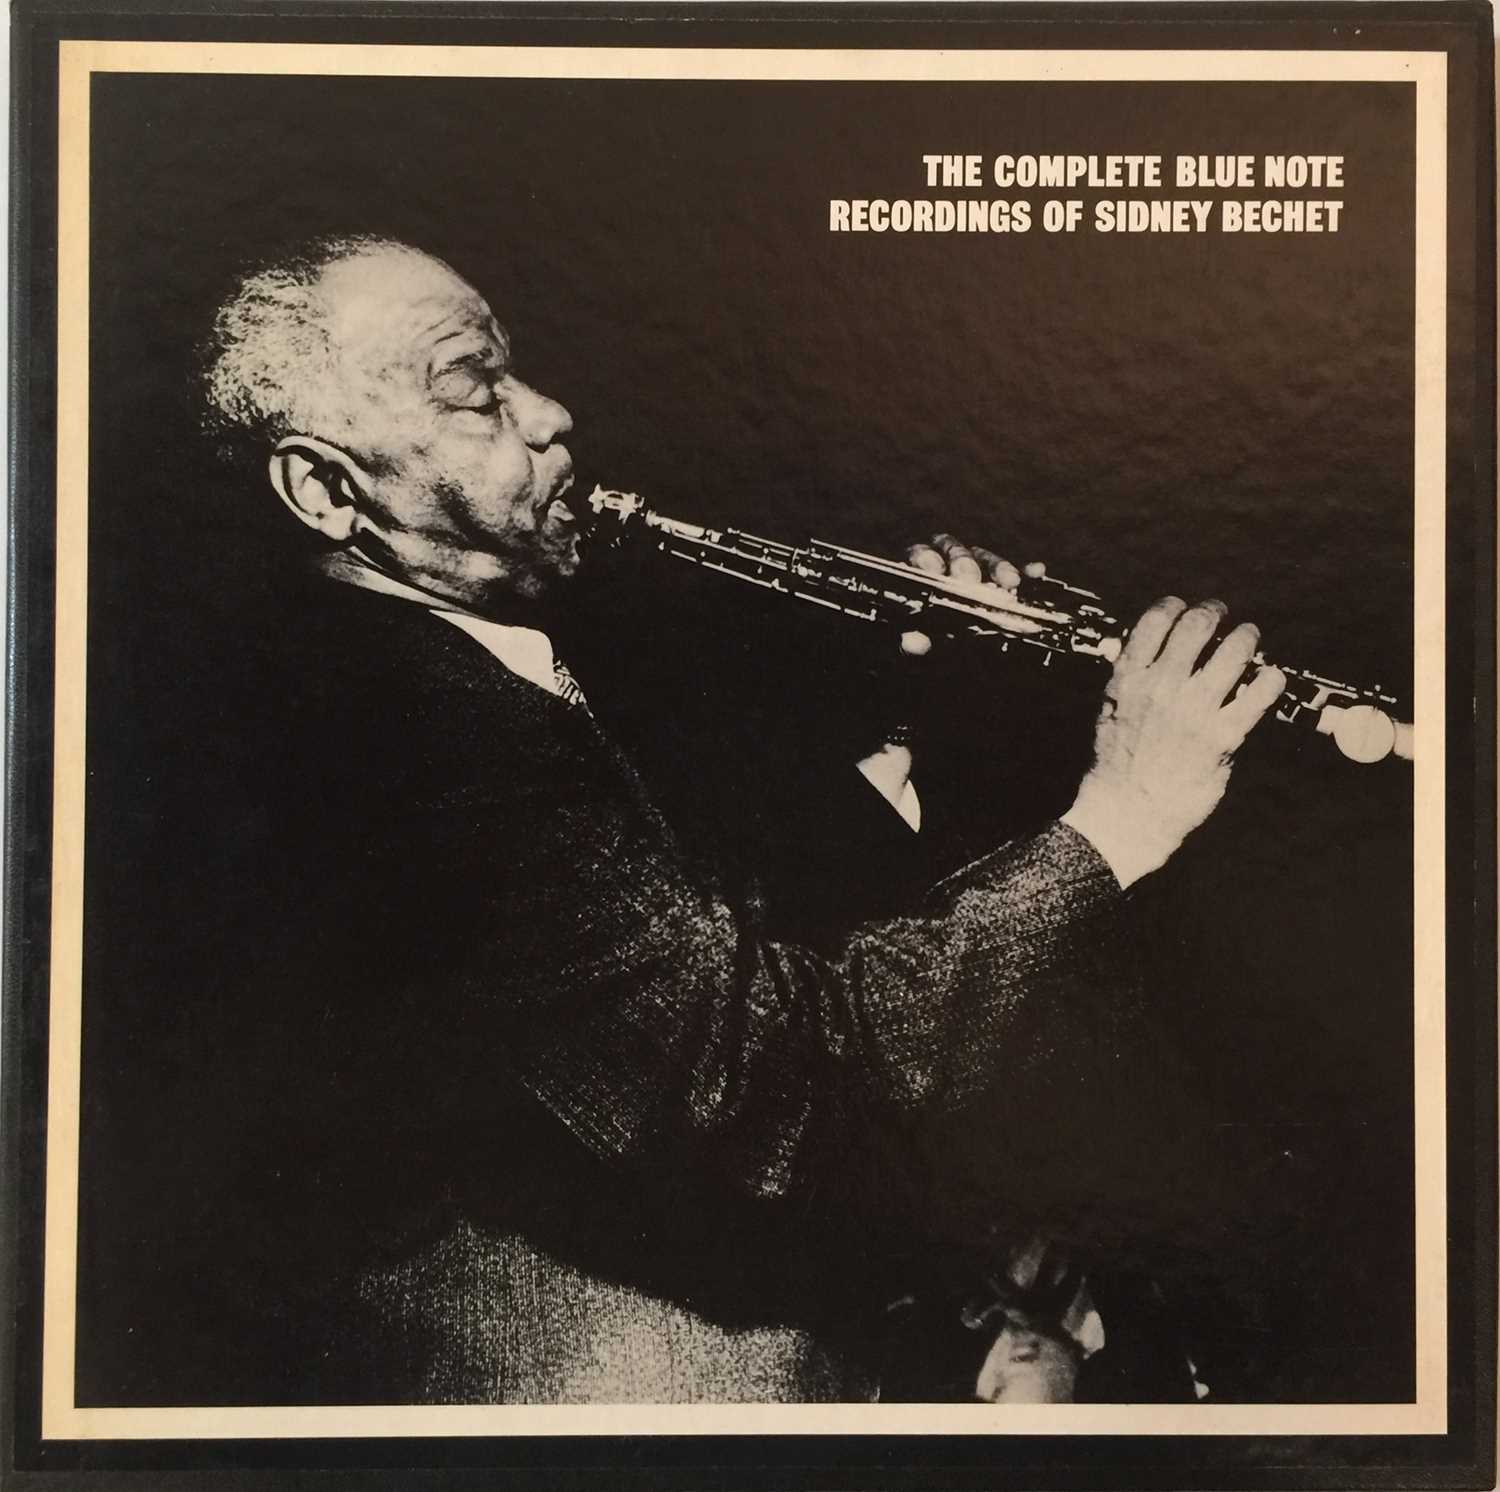 Lot 39 - SIDNEY BECHET - THE COMPLETE BLUE NOTE (MOSAIC 4 CD BOX SET - MD4-110)